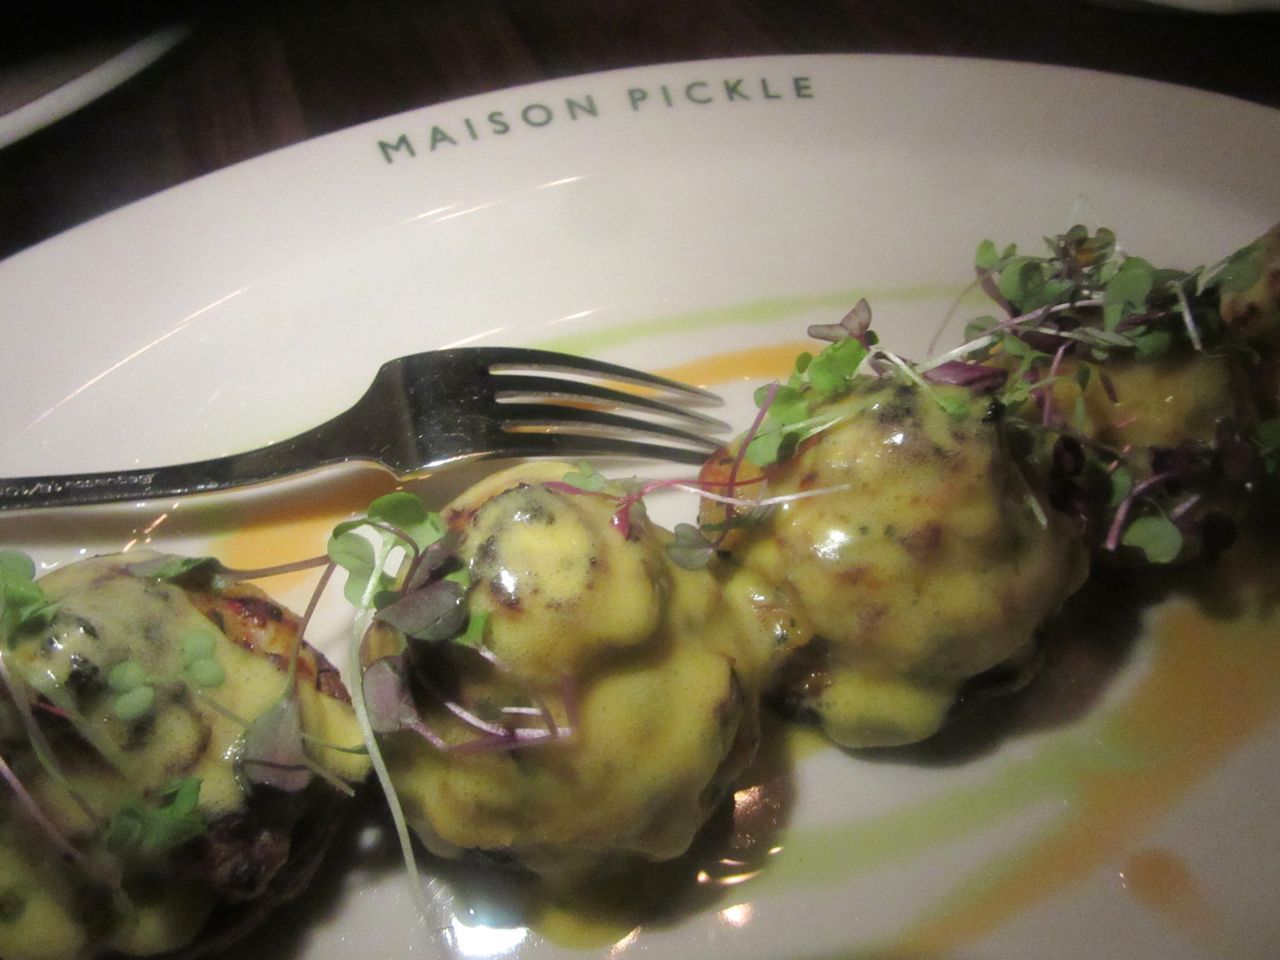 Dipping into Maison Pickle